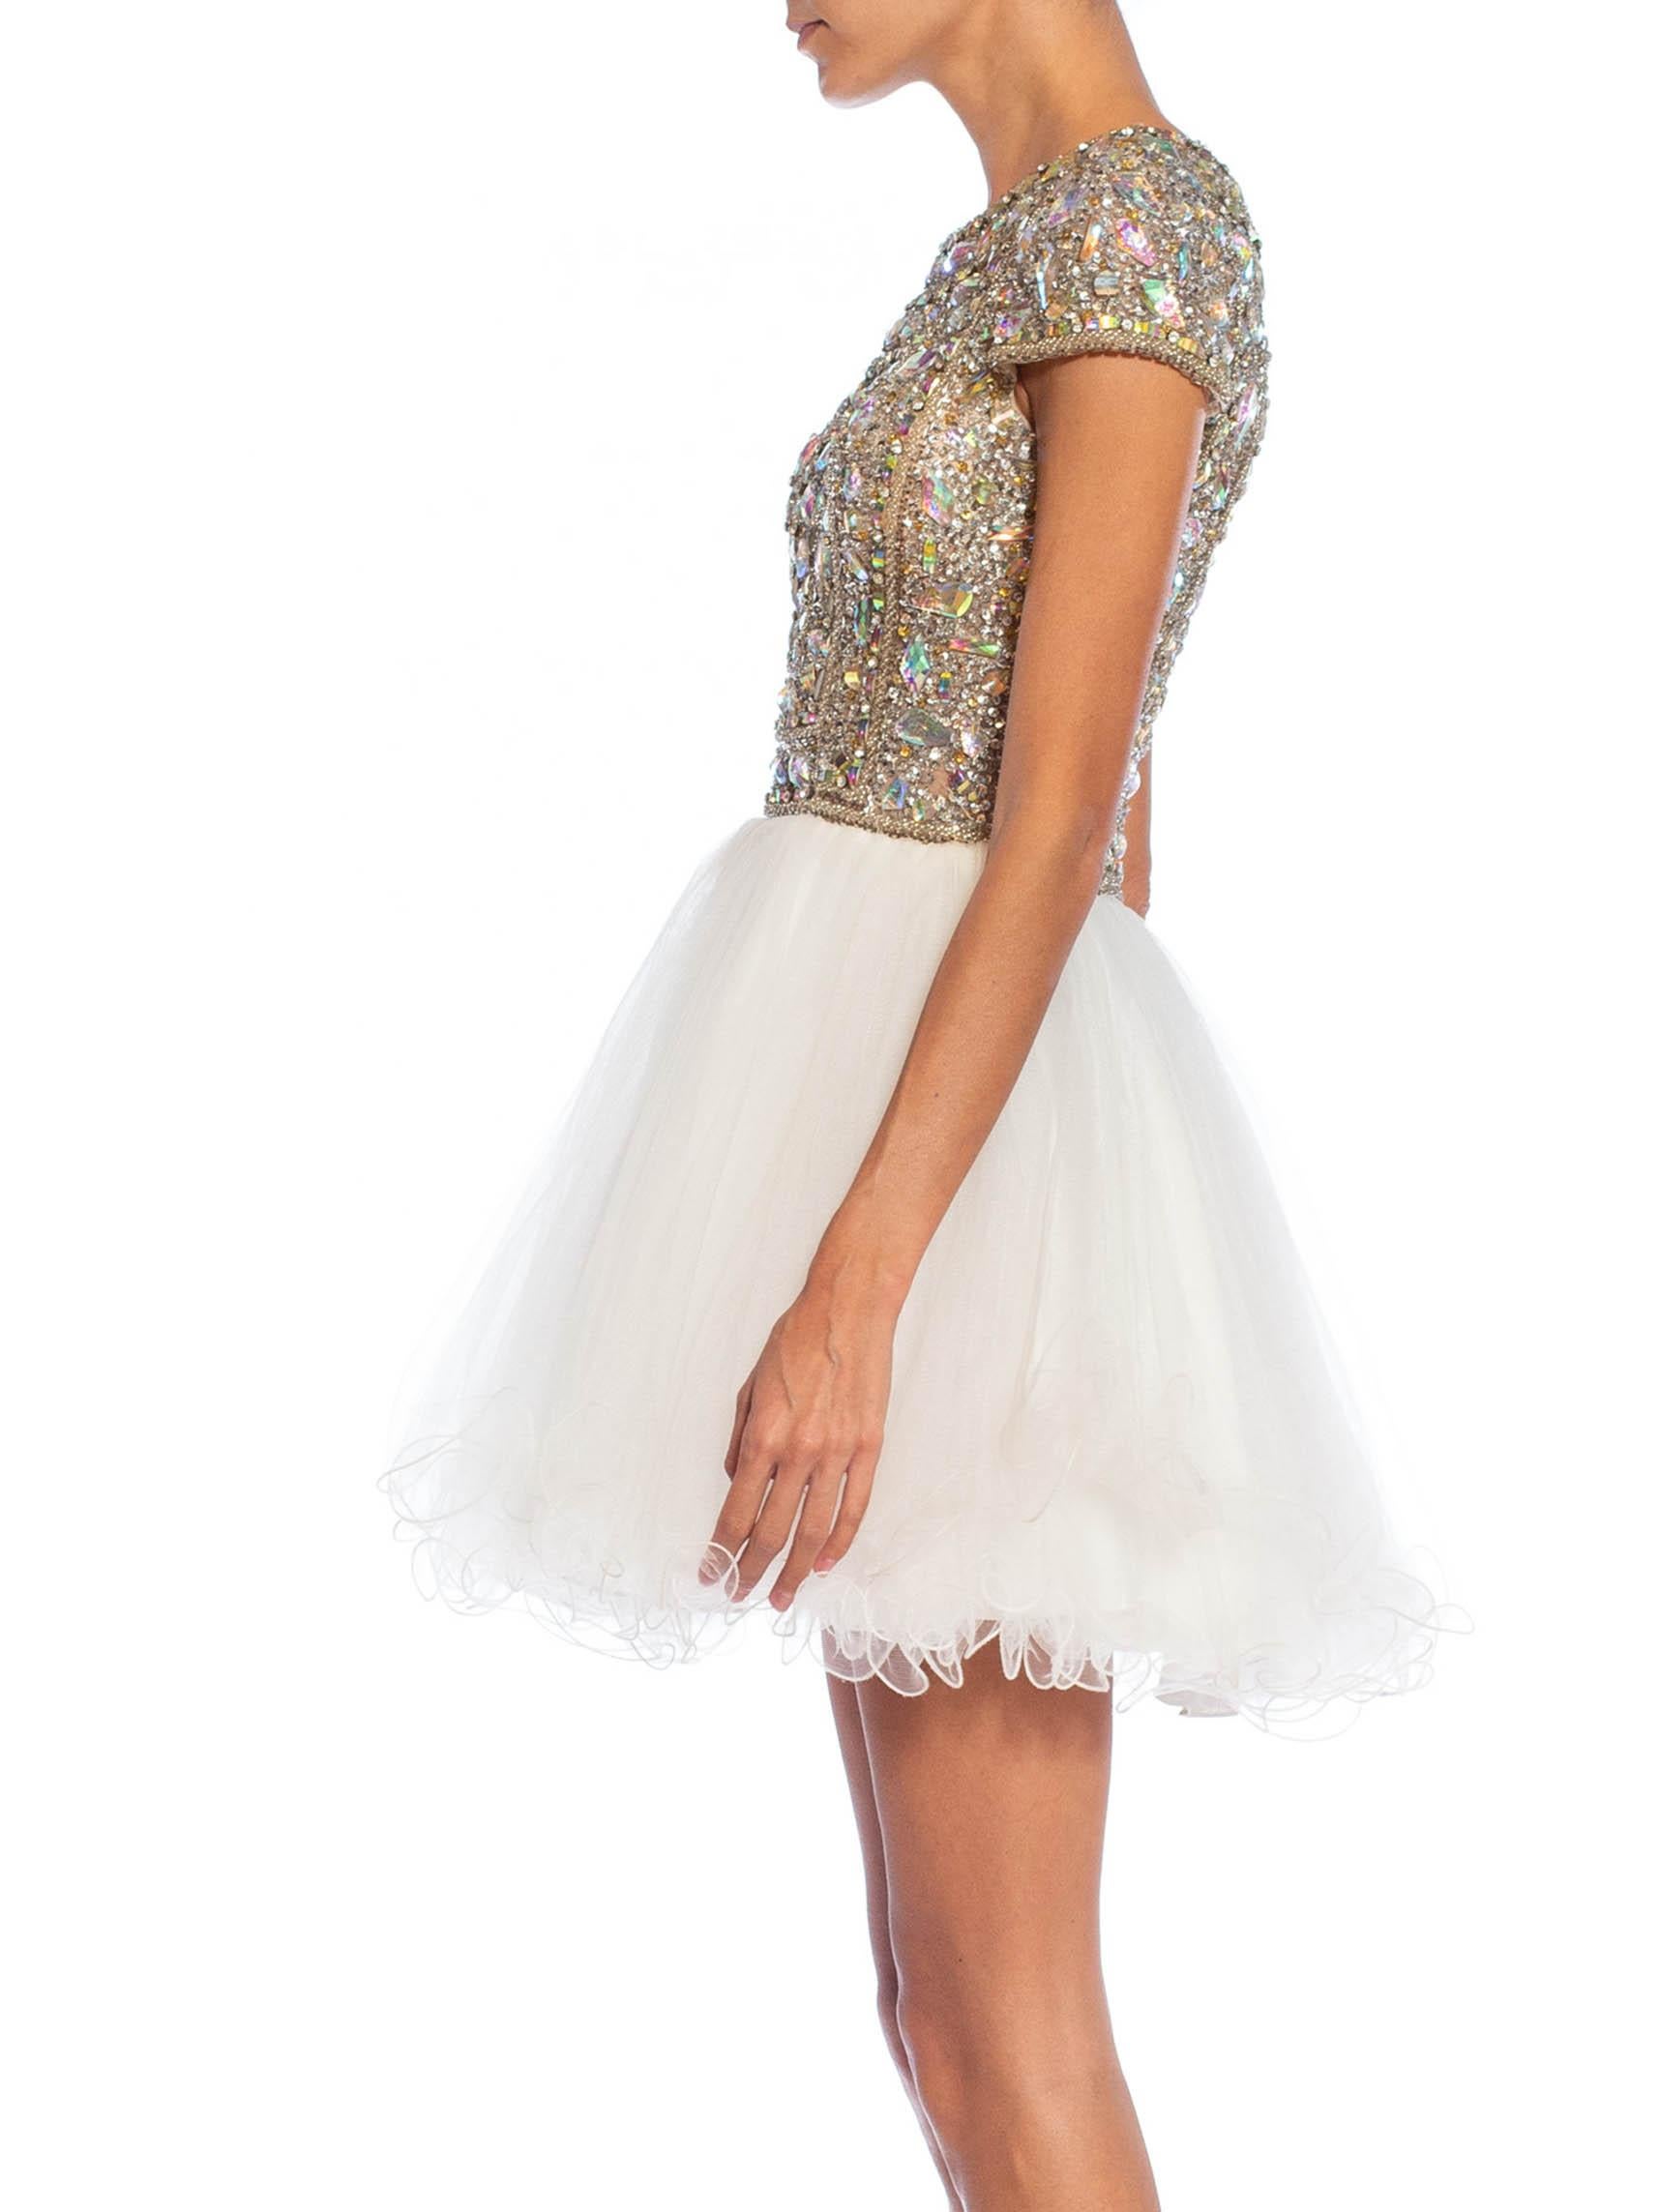 2010S Silver & White Beaded Tulle Cocktail Dress In Excellent Condition For Sale In New York, NY